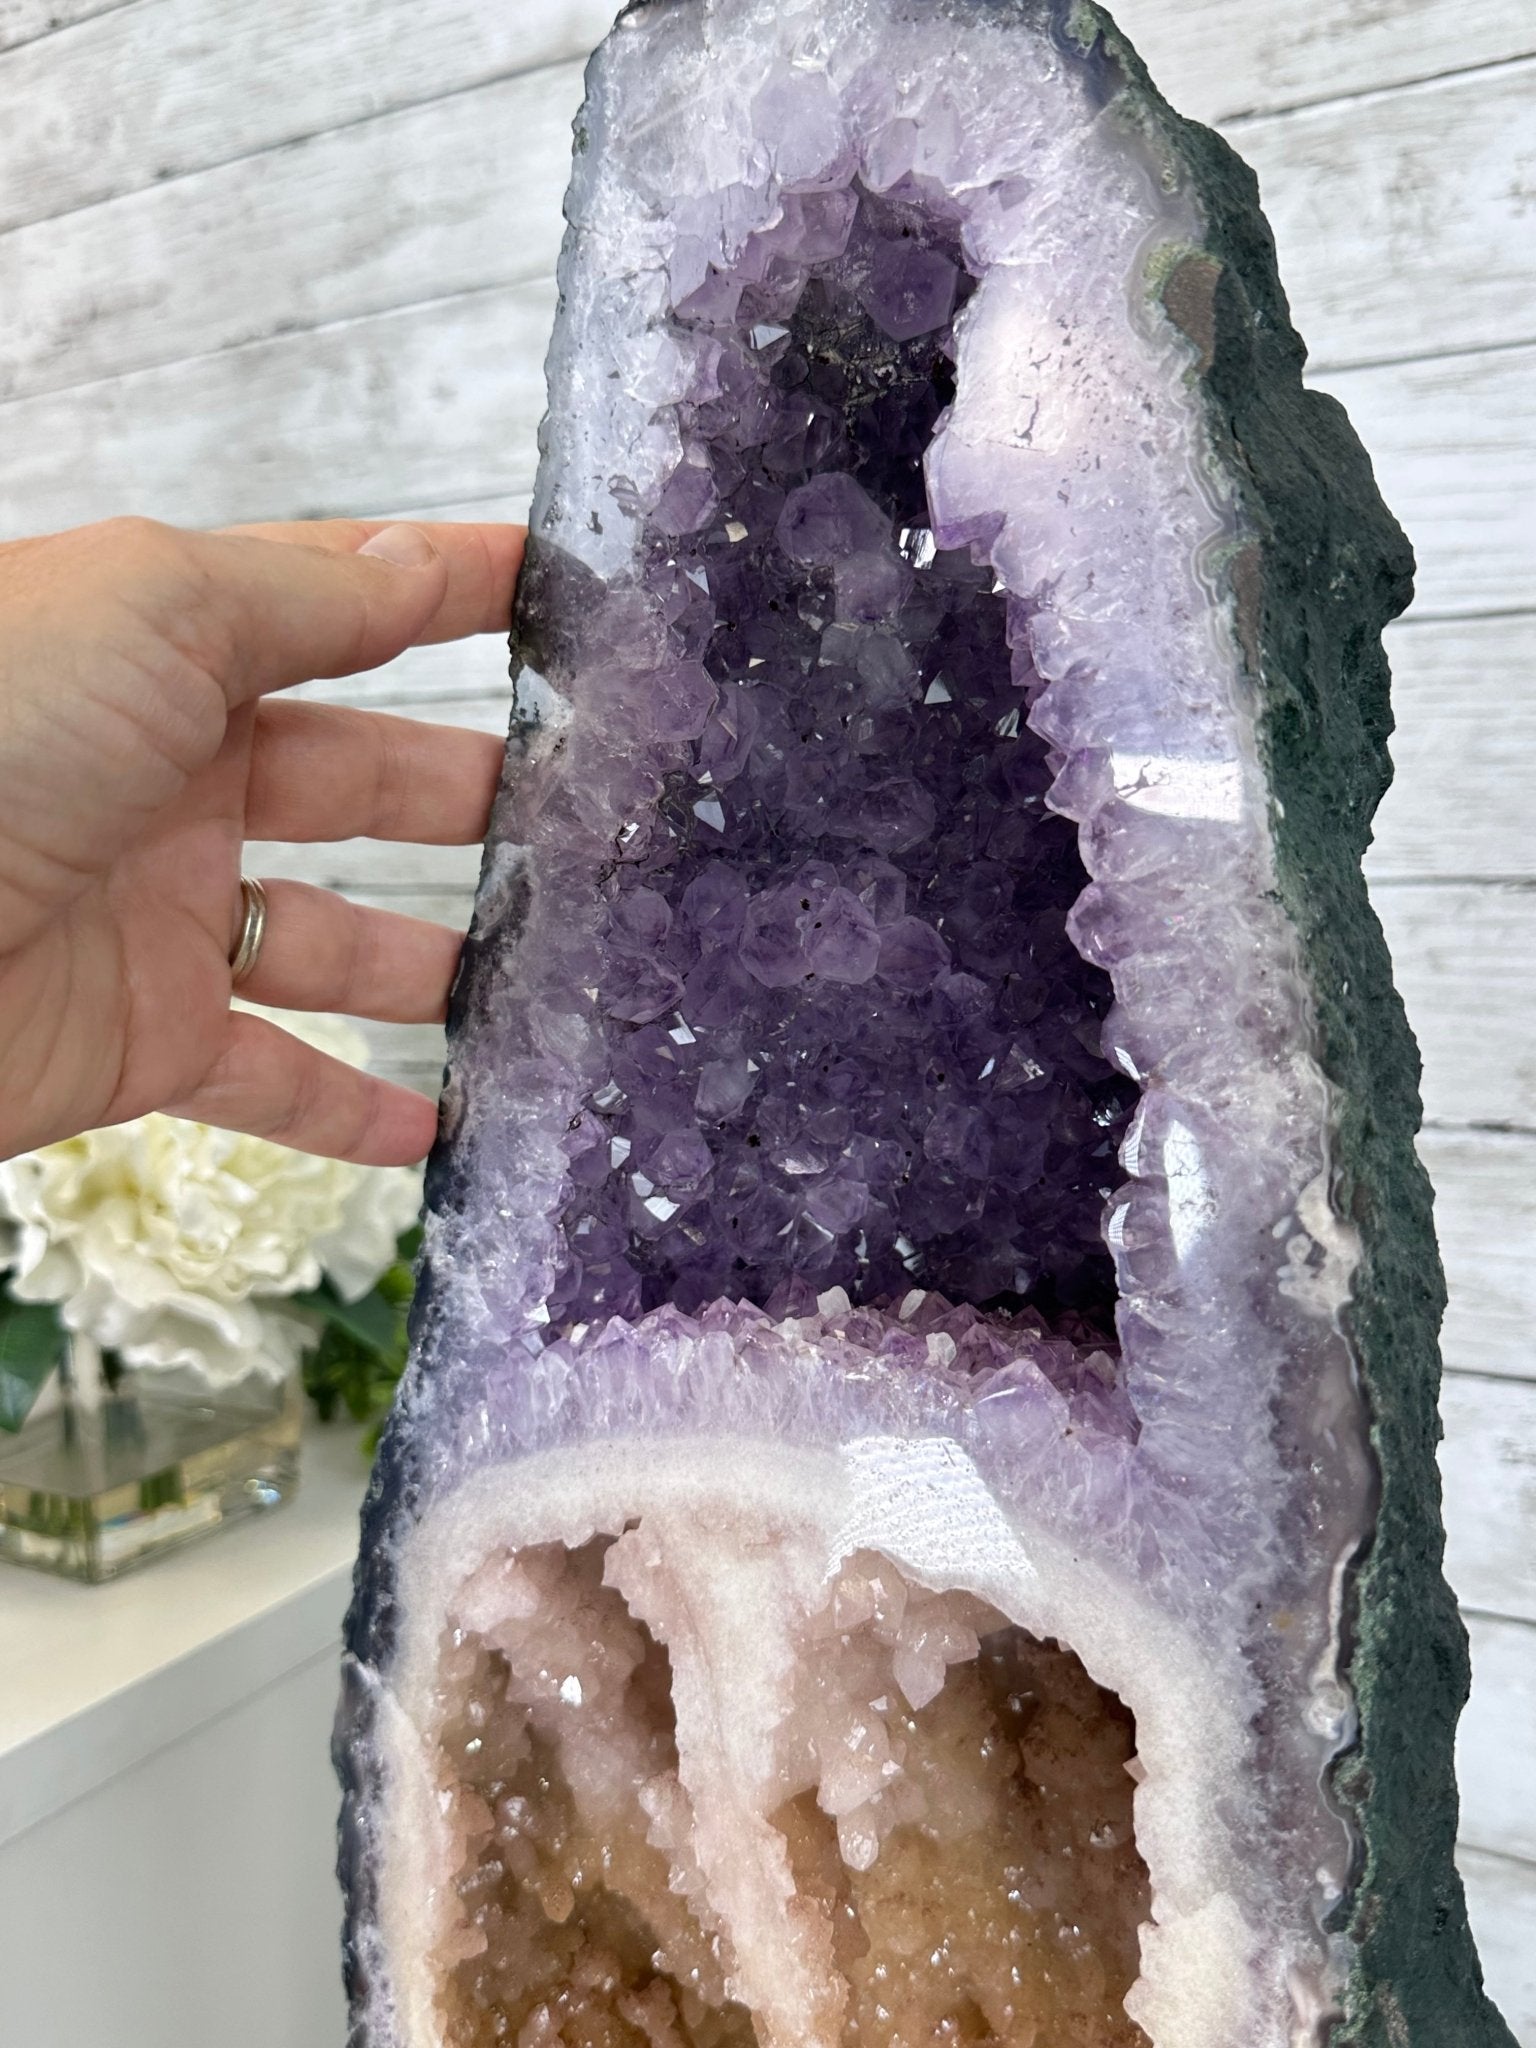 Super Quality Brazilian Amethyst Cathedral, 81.8 lbs & 28.5" Tall, Model #5601-1265 by Brazil Gems - Brazil GemsBrazil GemsSuper Quality Brazilian Amethyst Cathedral, 81.8 lbs & 28.5" Tall, Model #5601-1265 by Brazil GemsCathedrals5601-1265